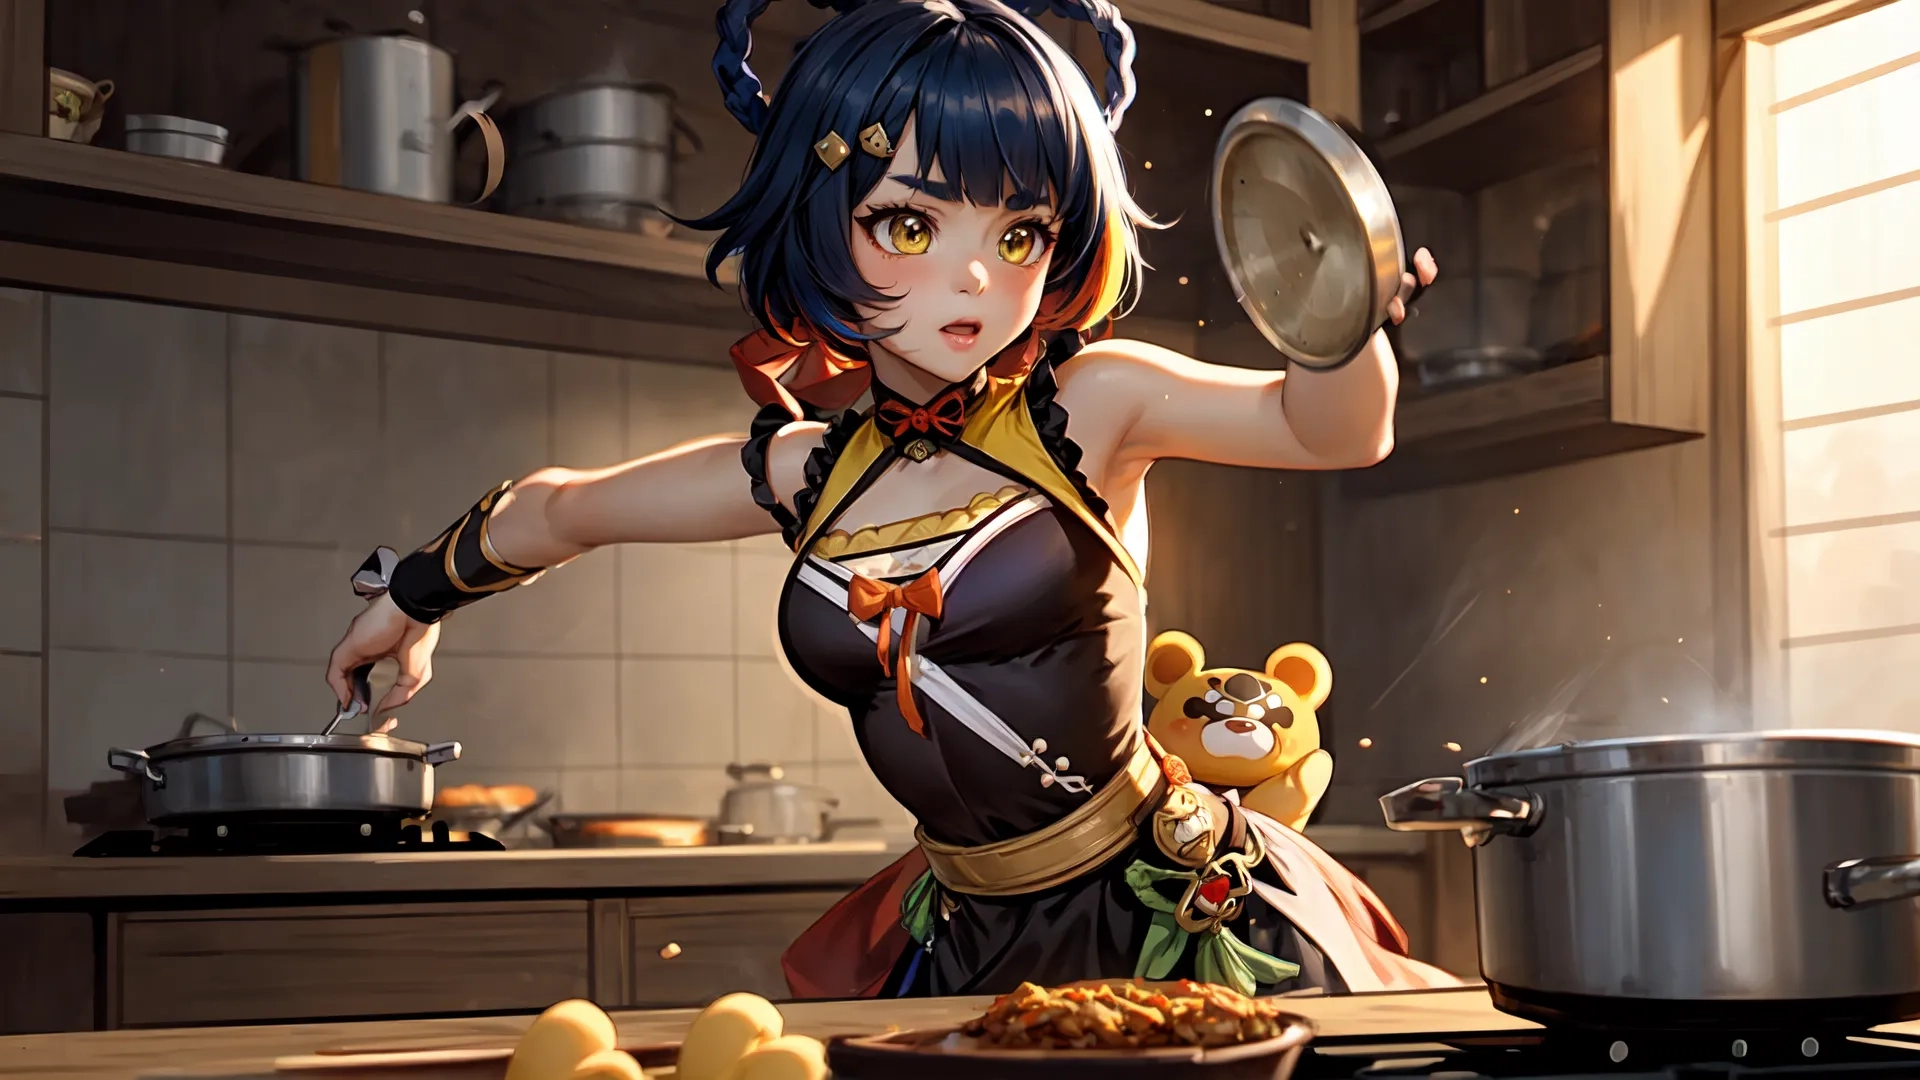 a picture of some food and the image of anime character cooking dinner with her pot of soup in the kitchen, some with other characters behind her
